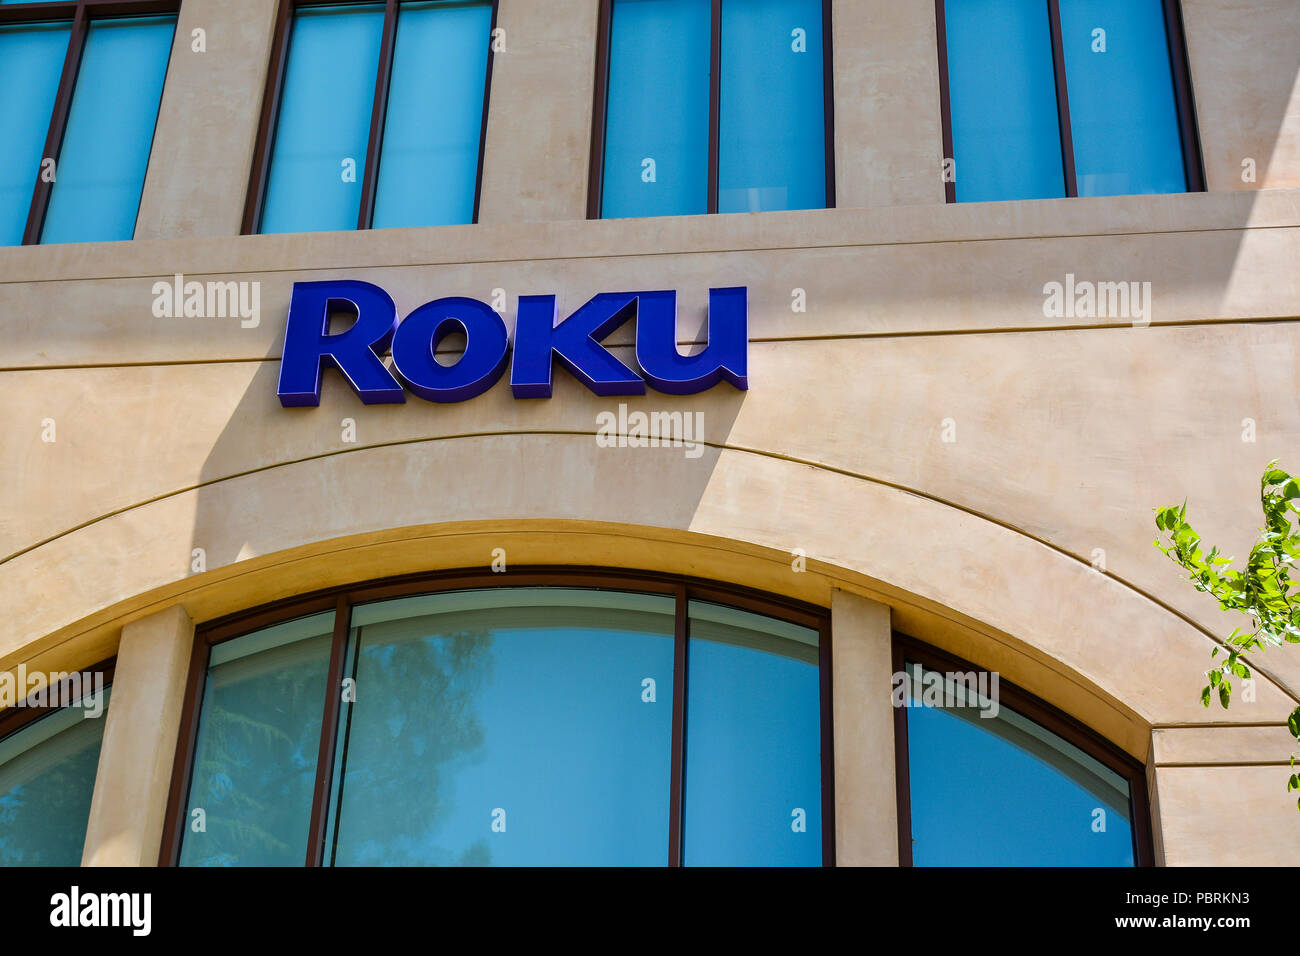 Los Gatos, CA - Jun. 10, 2017: Roku, Inc. Headquartered in Los Gatos, CA., Roku is a private company that manufactures home digital media products. Stock Photo